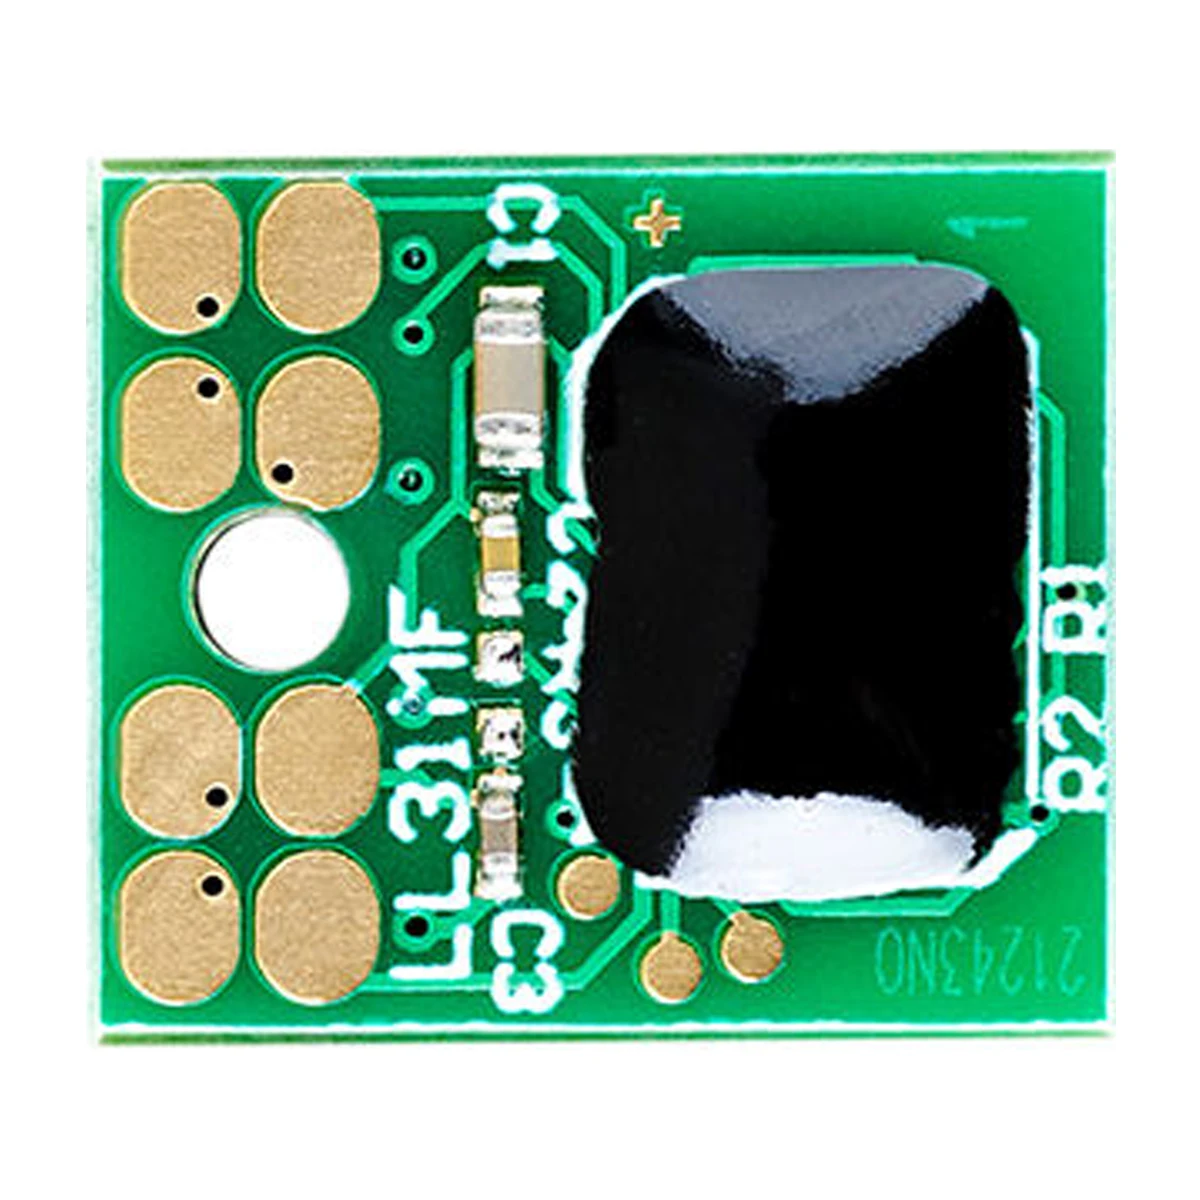 

World-Wide Uiversal Toner Reset Chip for Lexmark MS310 MS310d MS310dn MS312 MS312dn MS315 MS315dn MS410 MS410d MS410dn MS415